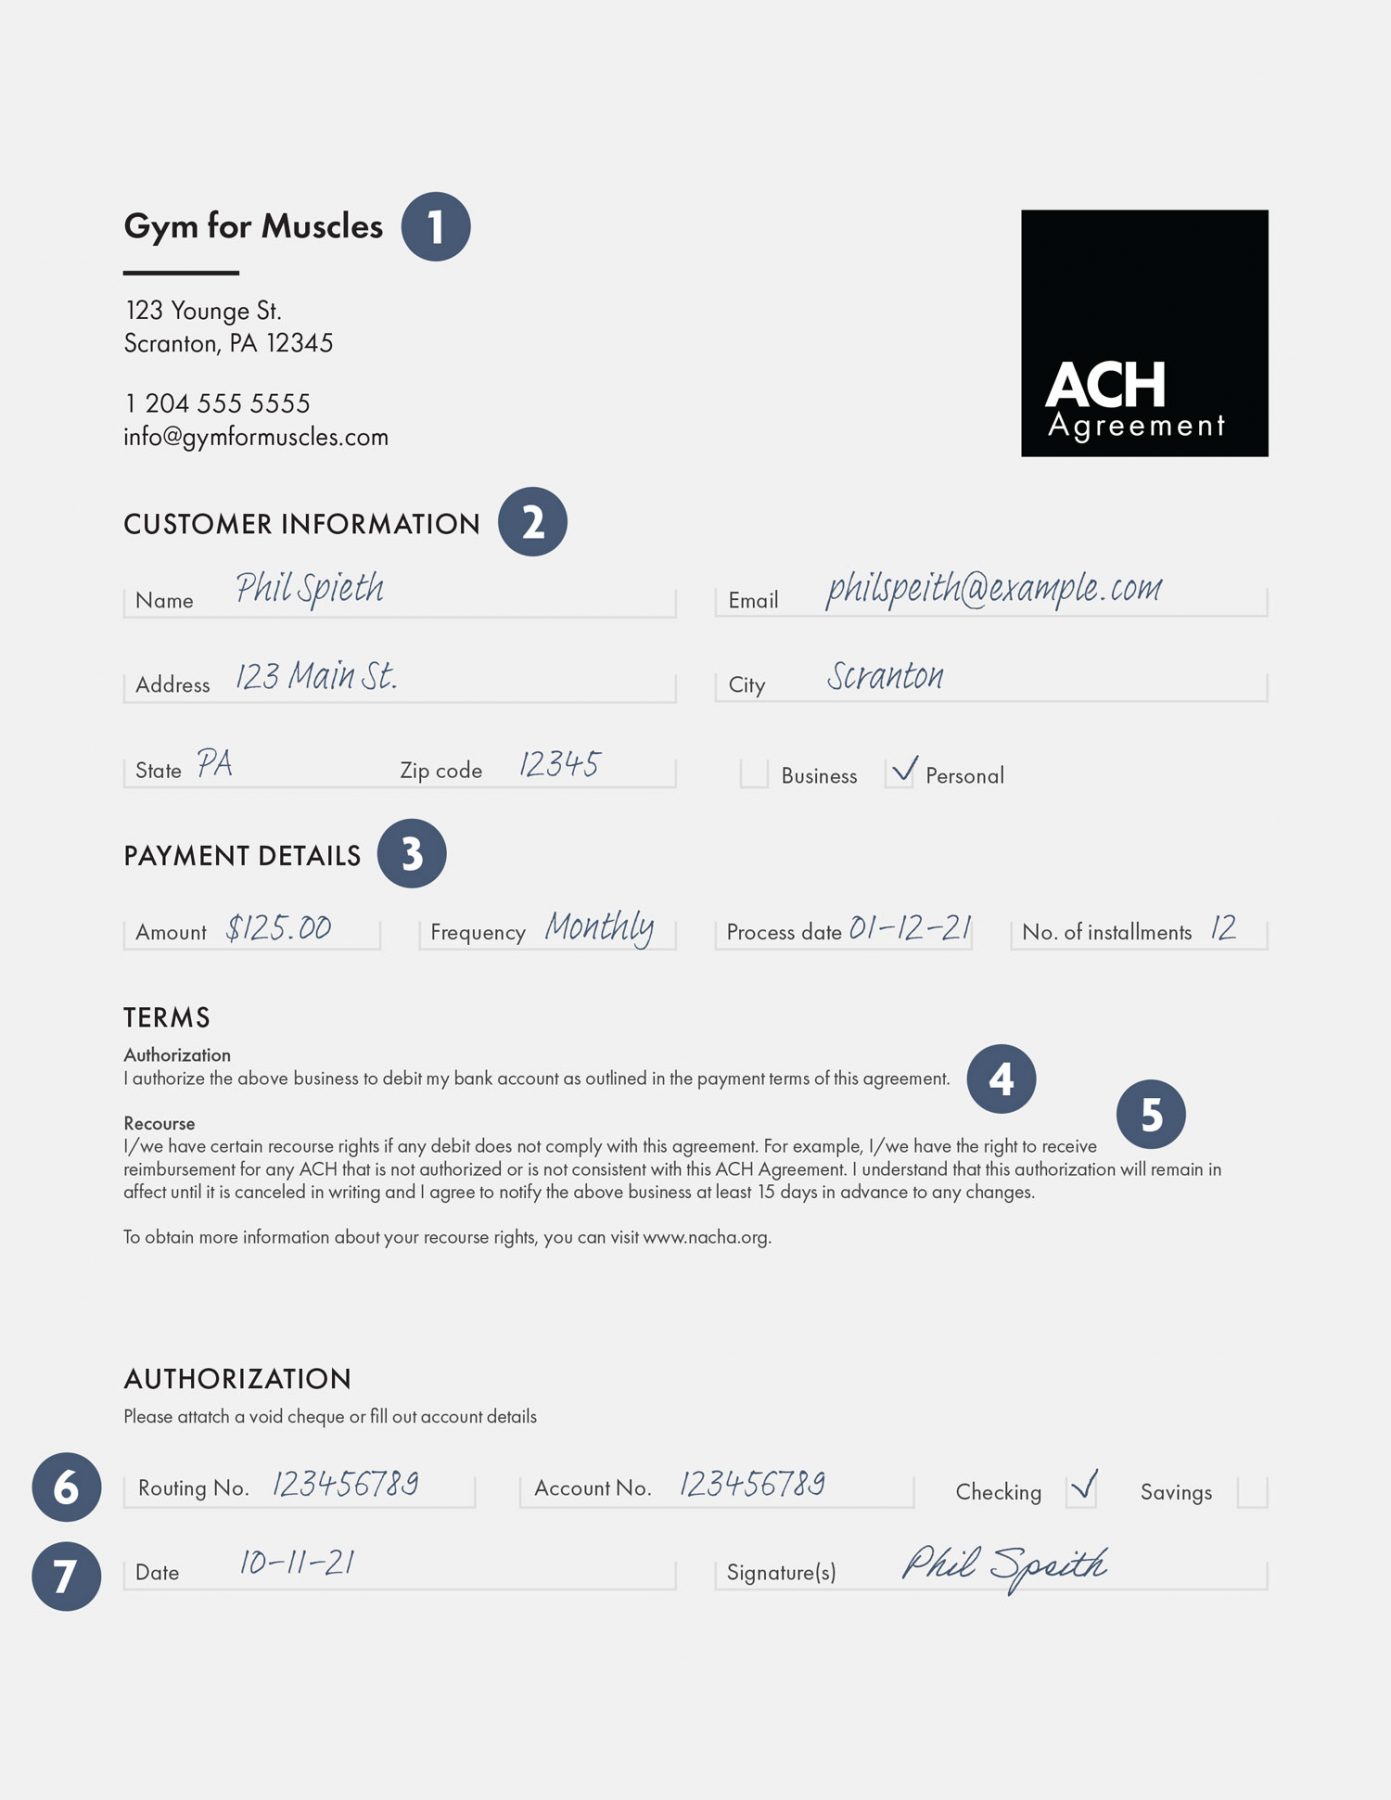 ach-authorization-form-how-to-create-one-rotessa-payments-free